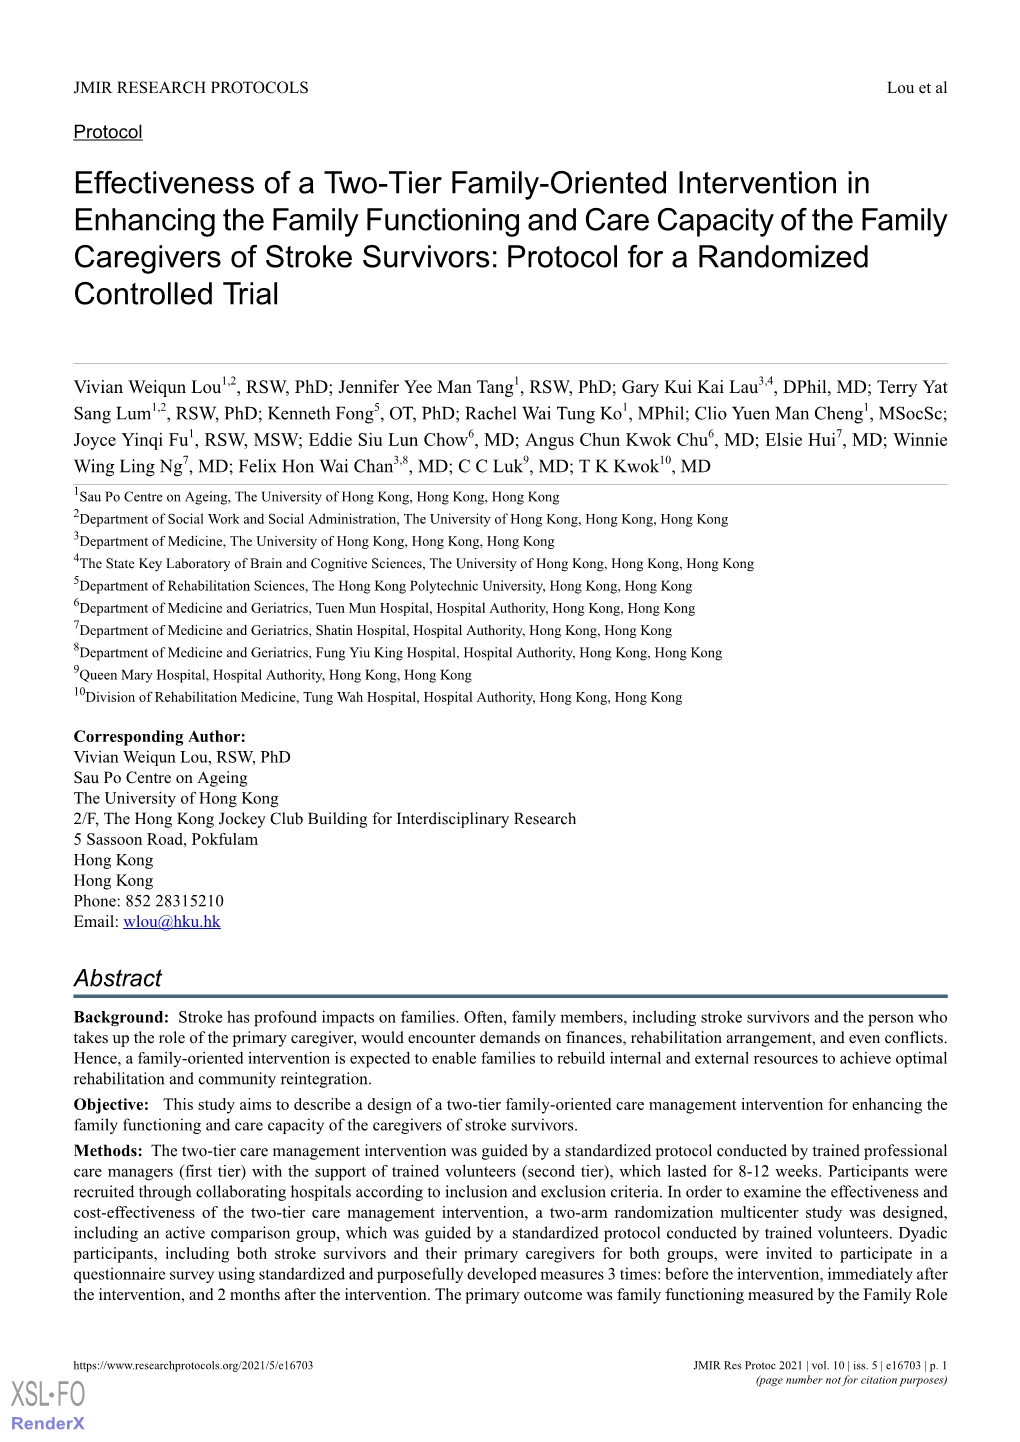 Effectiveness of a Two-Tier Family-Oriented Intervention in Enhancing the Family Functioning and Care Capacity of the Family Caregivers of Stroke Survivors: Protocol for a Randomized